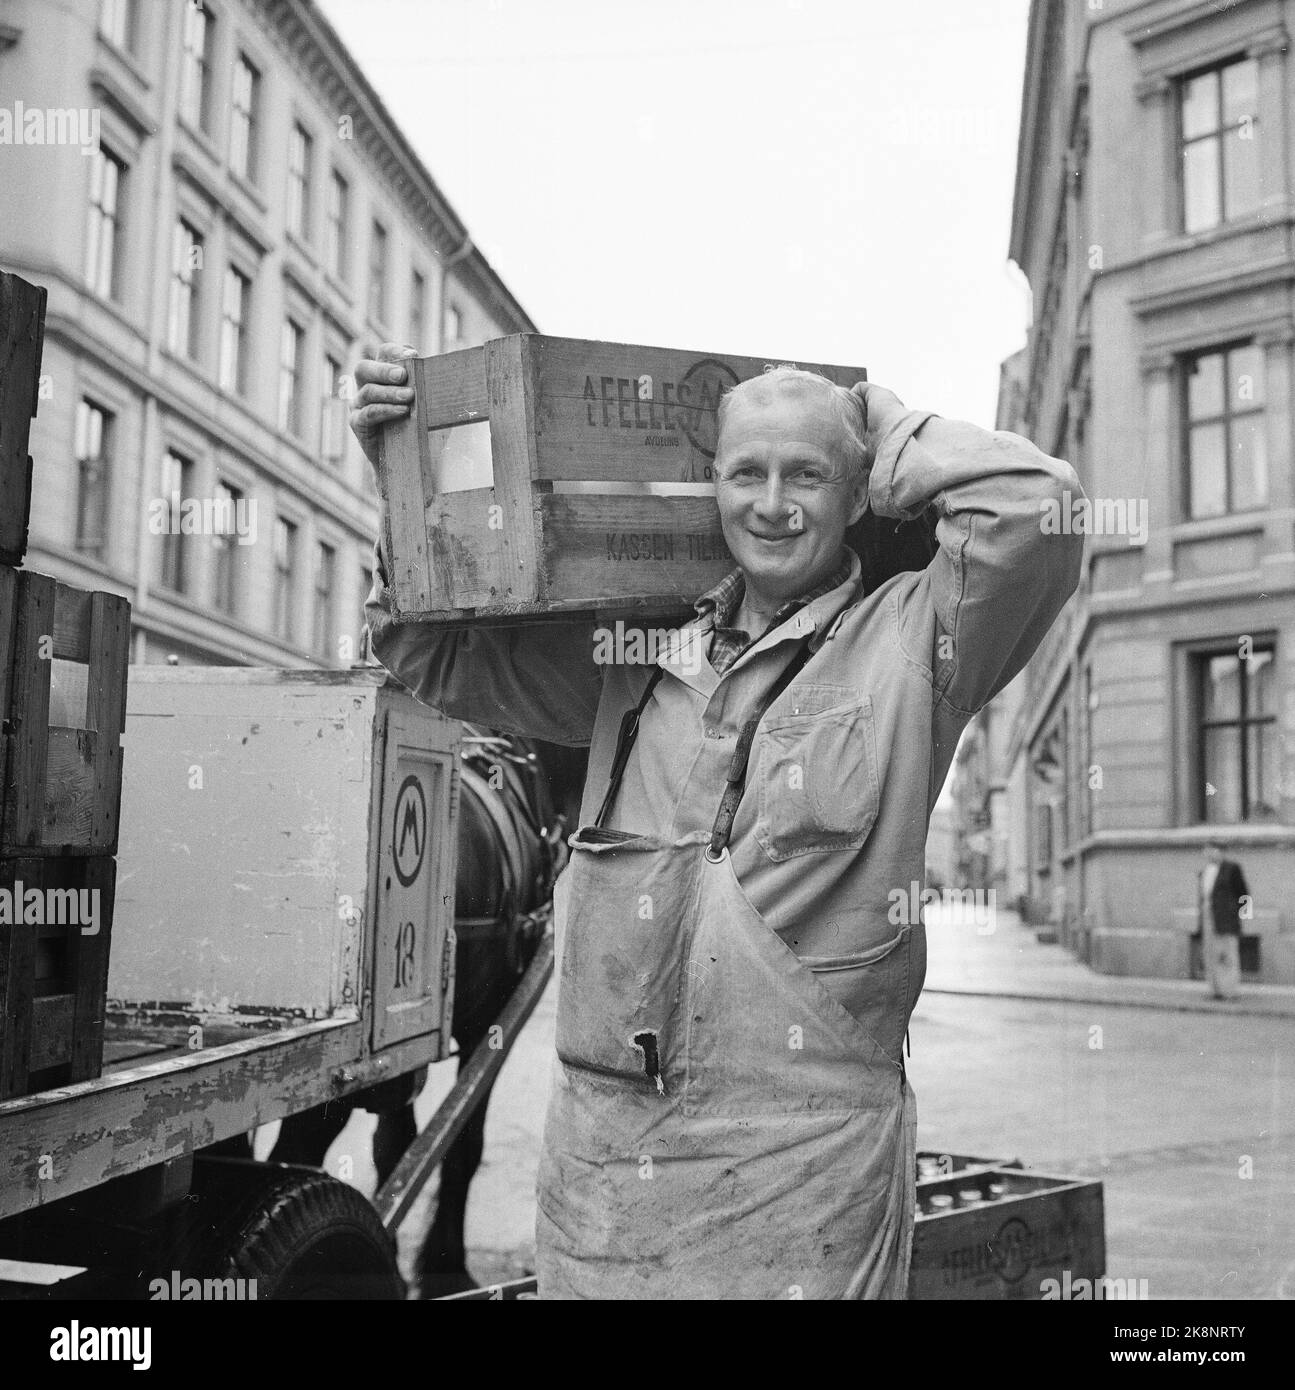 19550917 The milk our problem child Milk shortage in Oslo. People are in line to grab milk. Volunteering has been introduced. The milk comes with horses and carts, here carriage 18 from the common dairy. Photo; Sverre A. Børretzen / Current / NTB Stock Photo